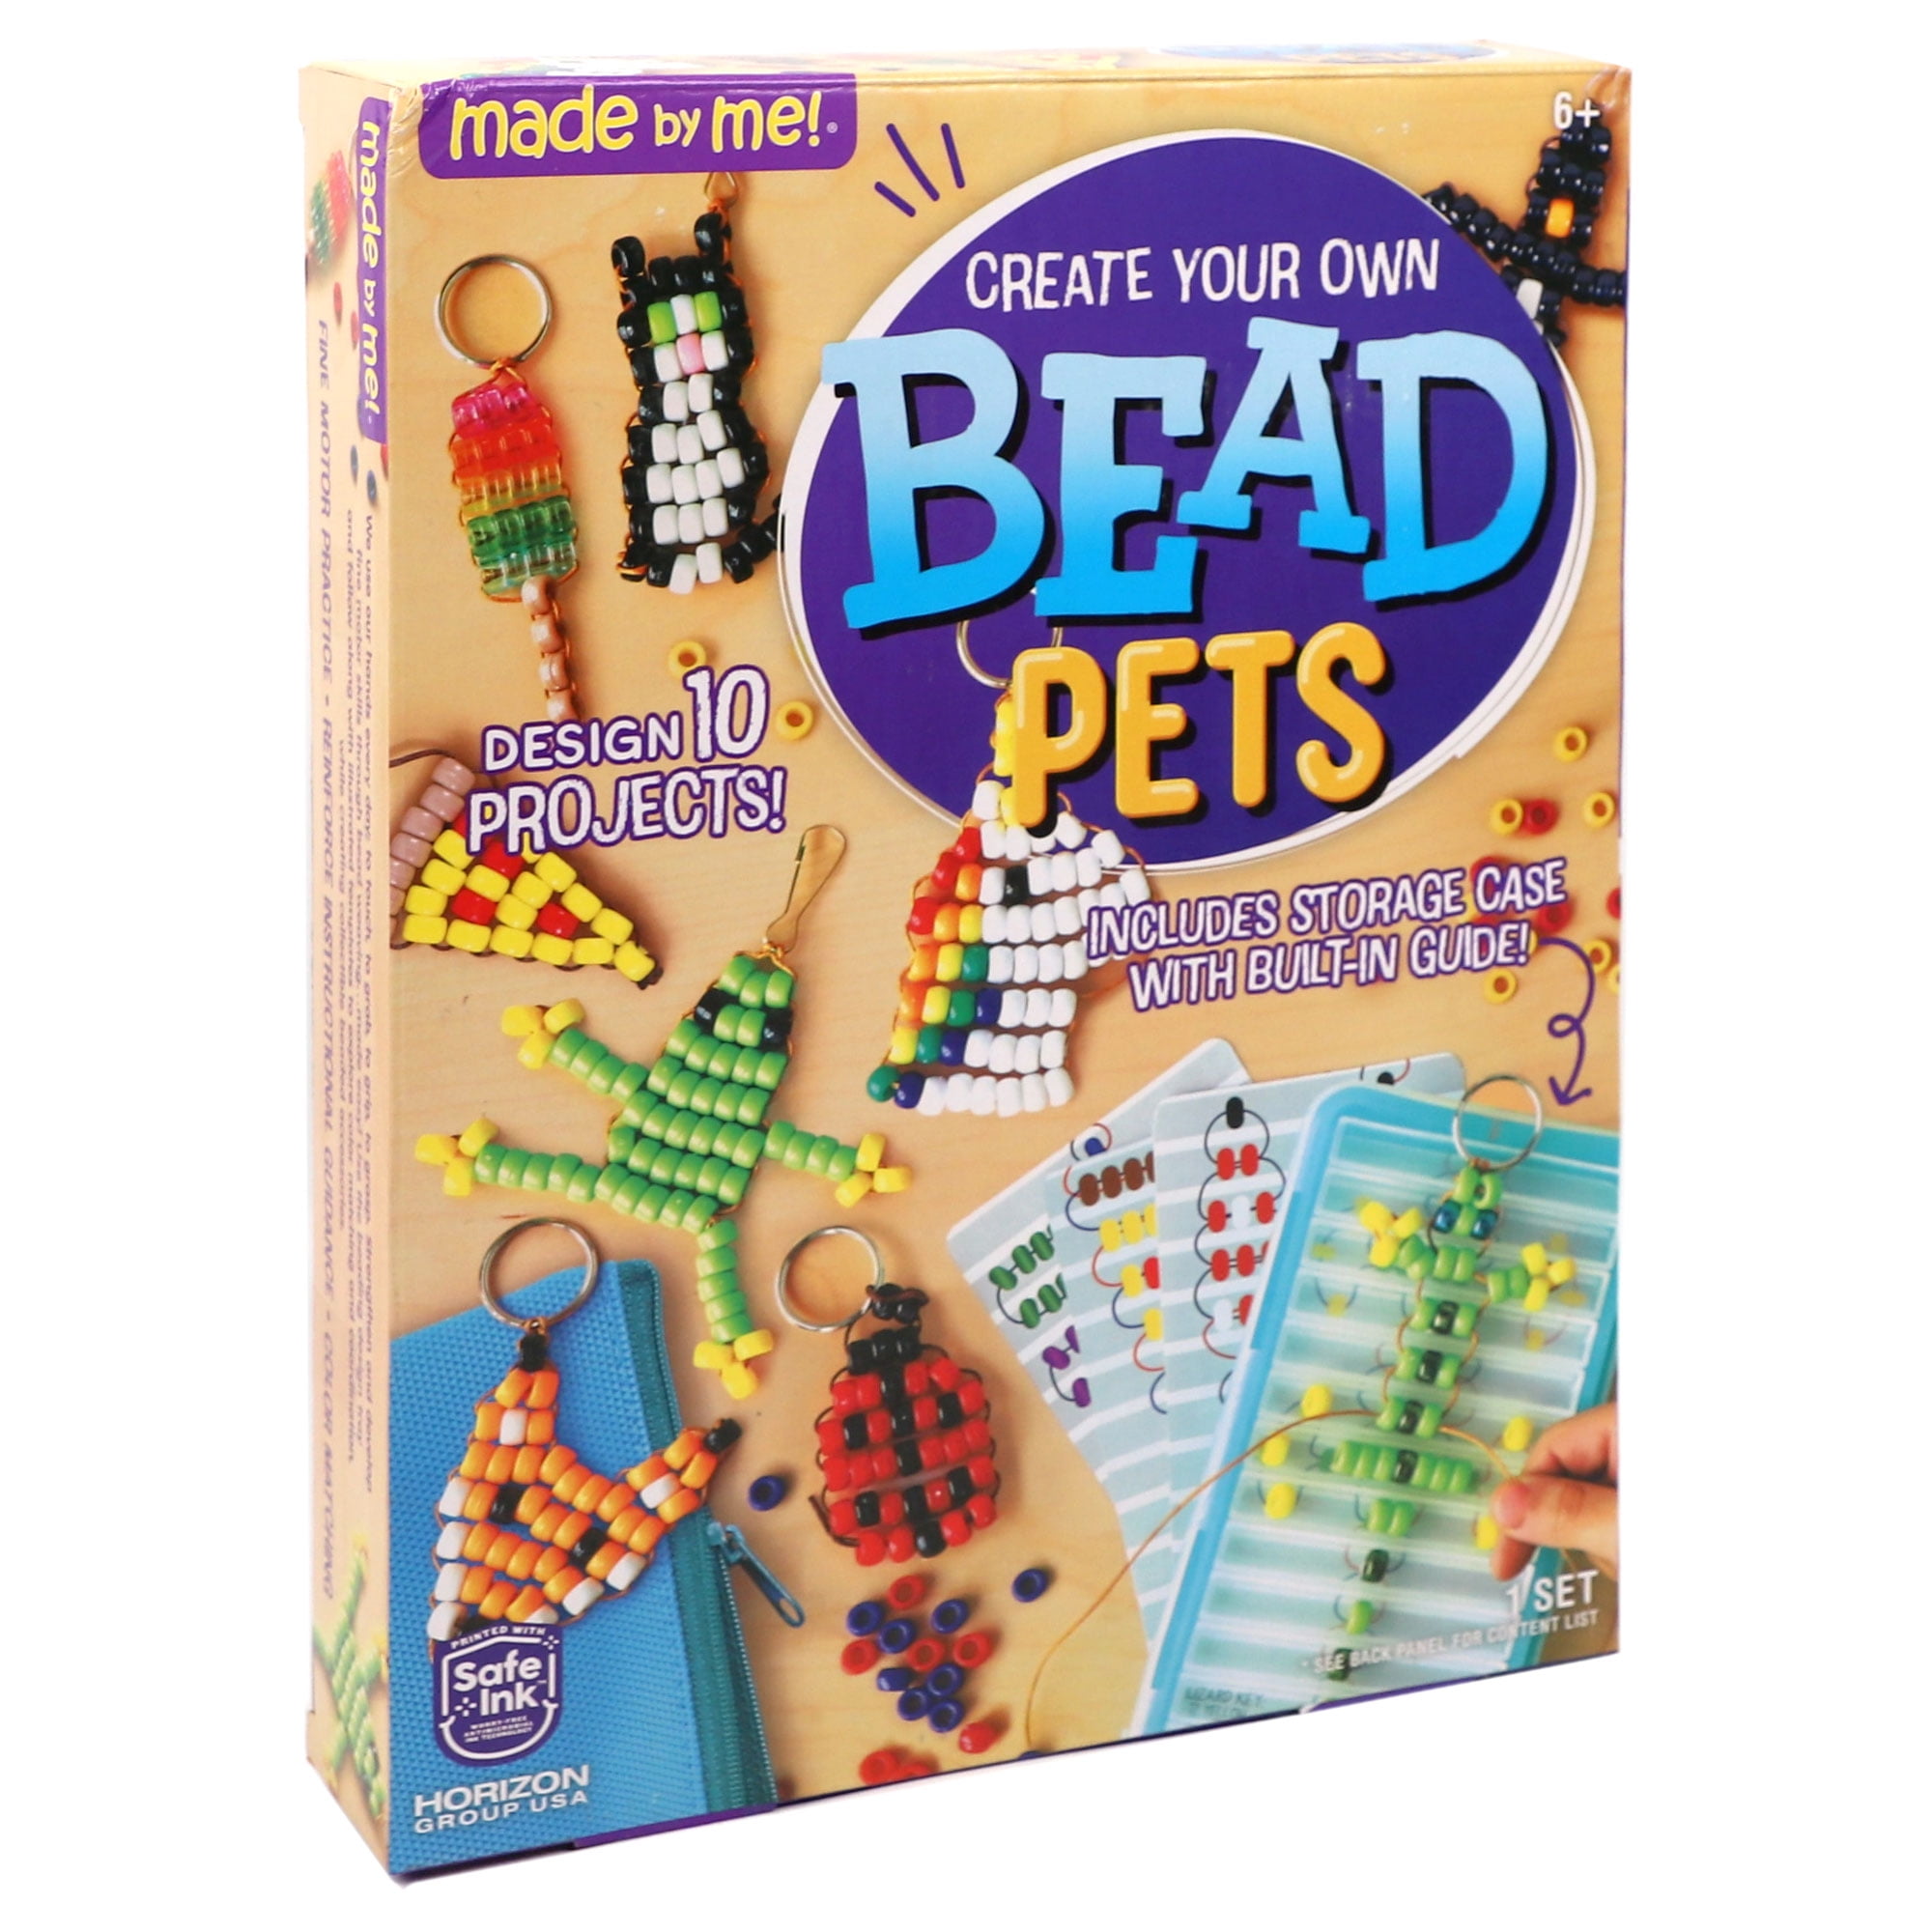 Create bead pets at the Rockport library, Archives